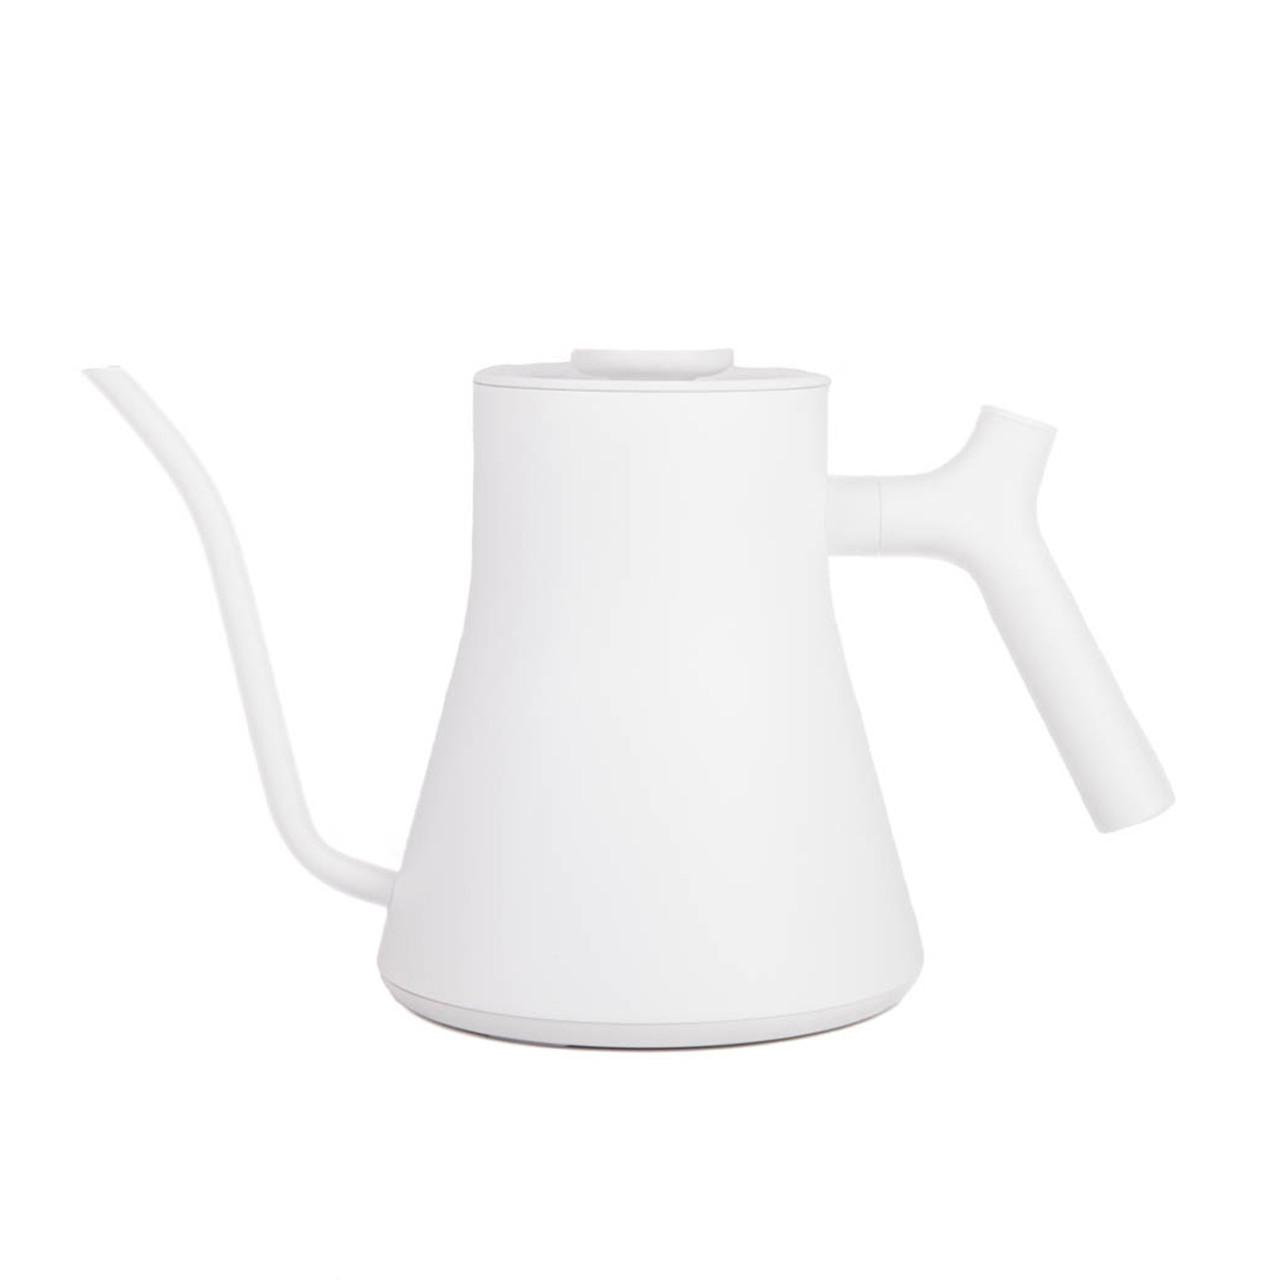 https://cdn11.bigcommerce.com/s-6h7ychjk4/images/stencil/1280x1280/products/11126/94470/Fellow-Stagg-EKG-Pro-Electric-Pouring-Kettle-WBG-6_1_copy__55024.1667319006.jpg?c=1&imbypass=on